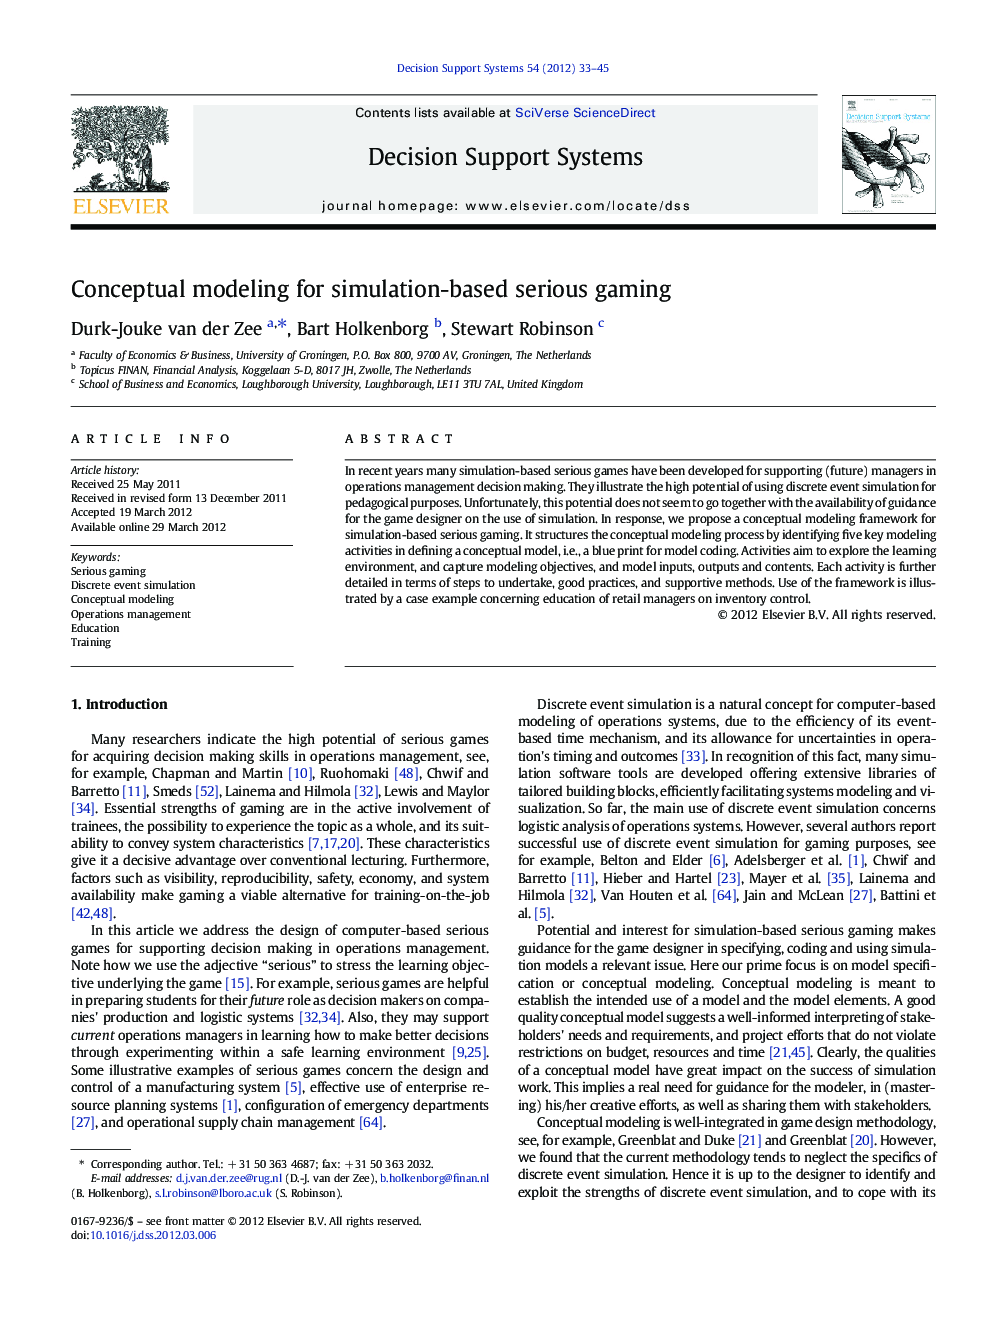 Conceptual modeling for simulation-based serious gaming